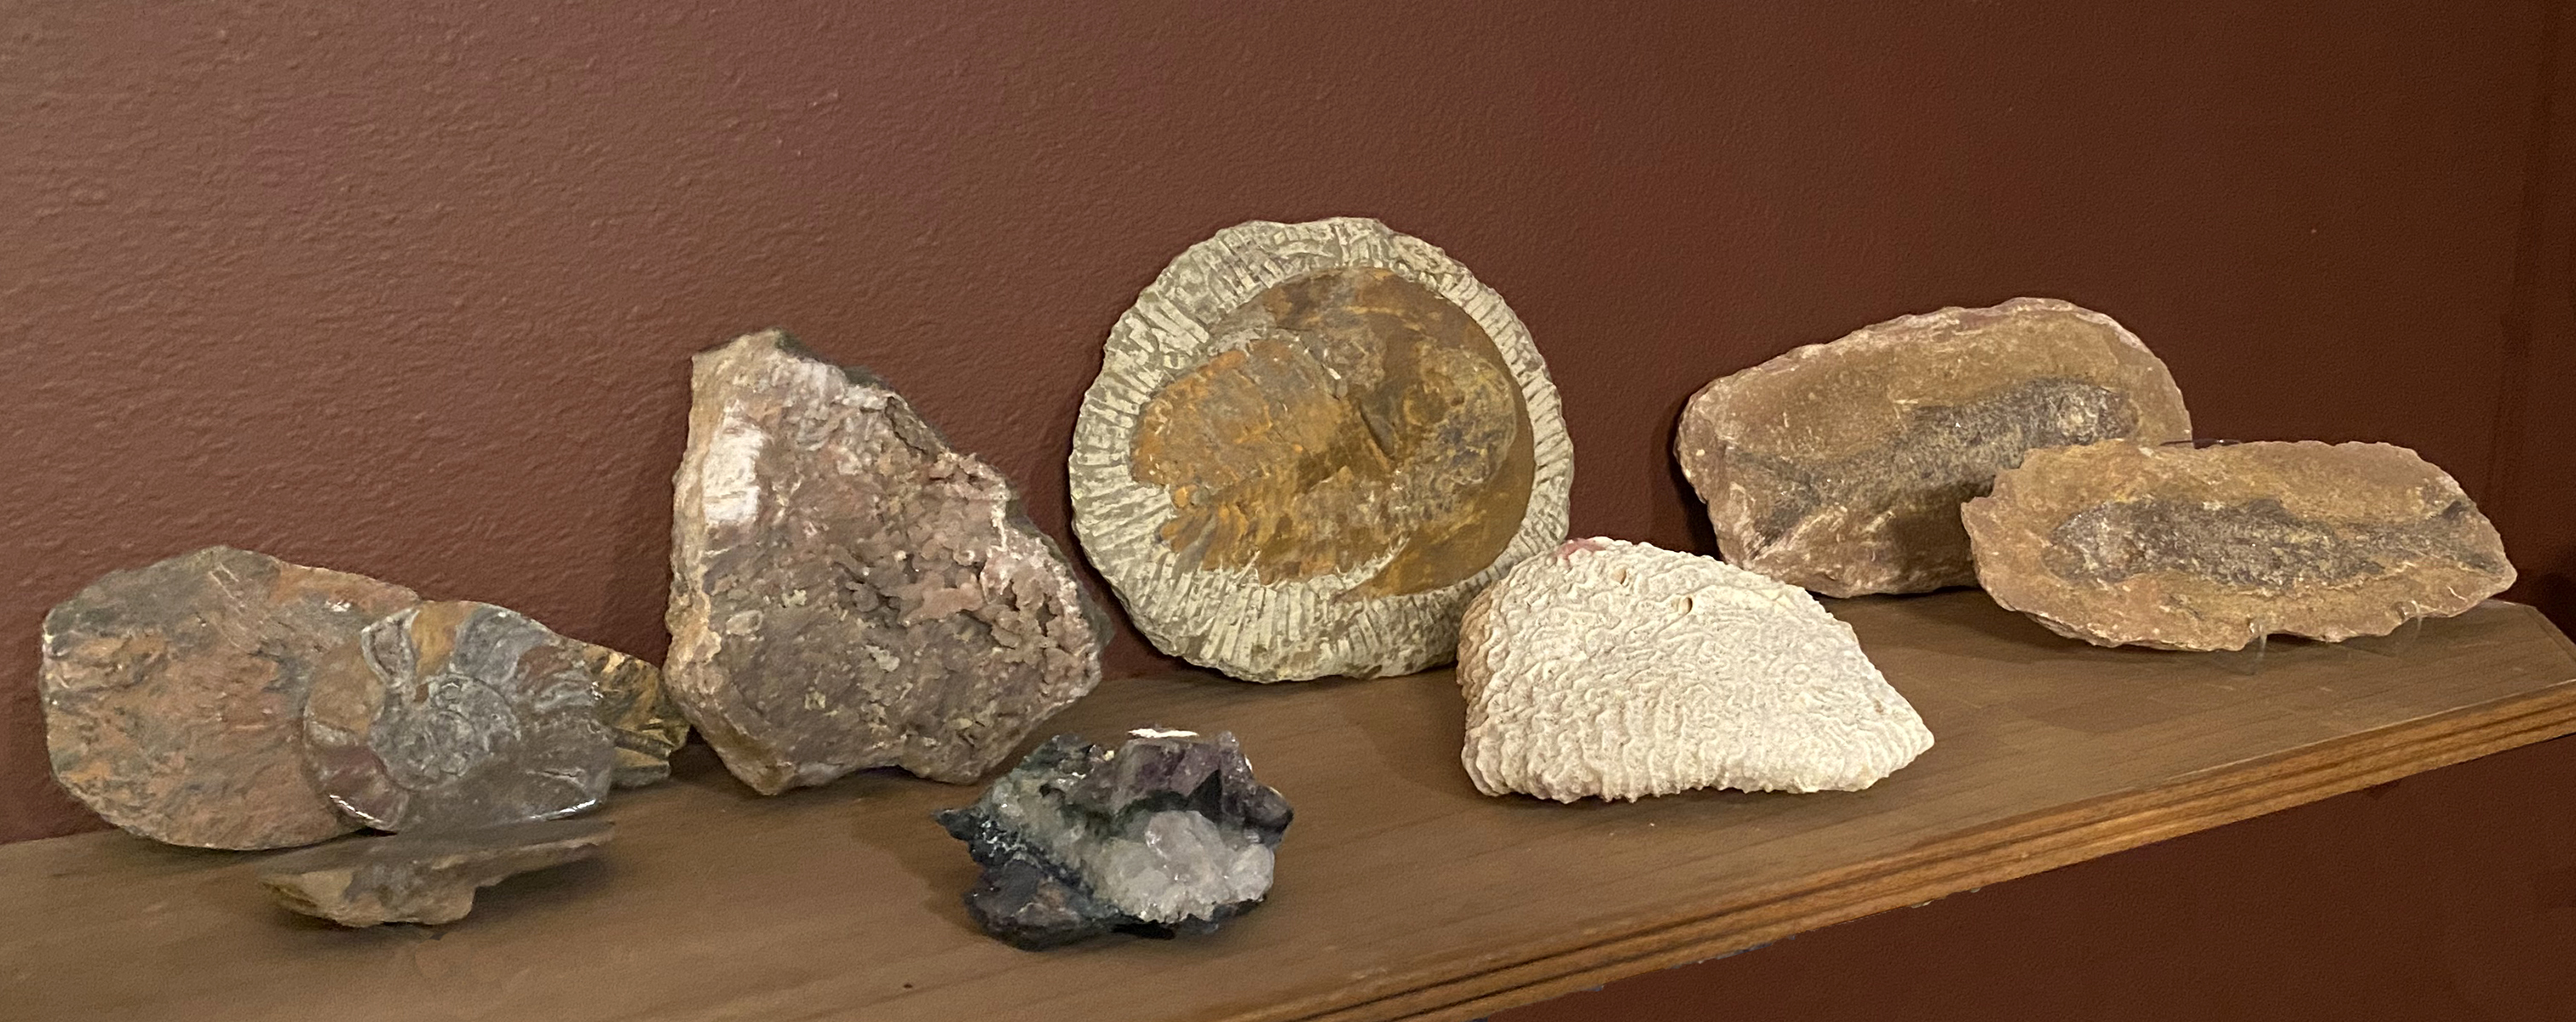 8 PIECE GEODE AND FOSSIL COLLECTION  2743f6